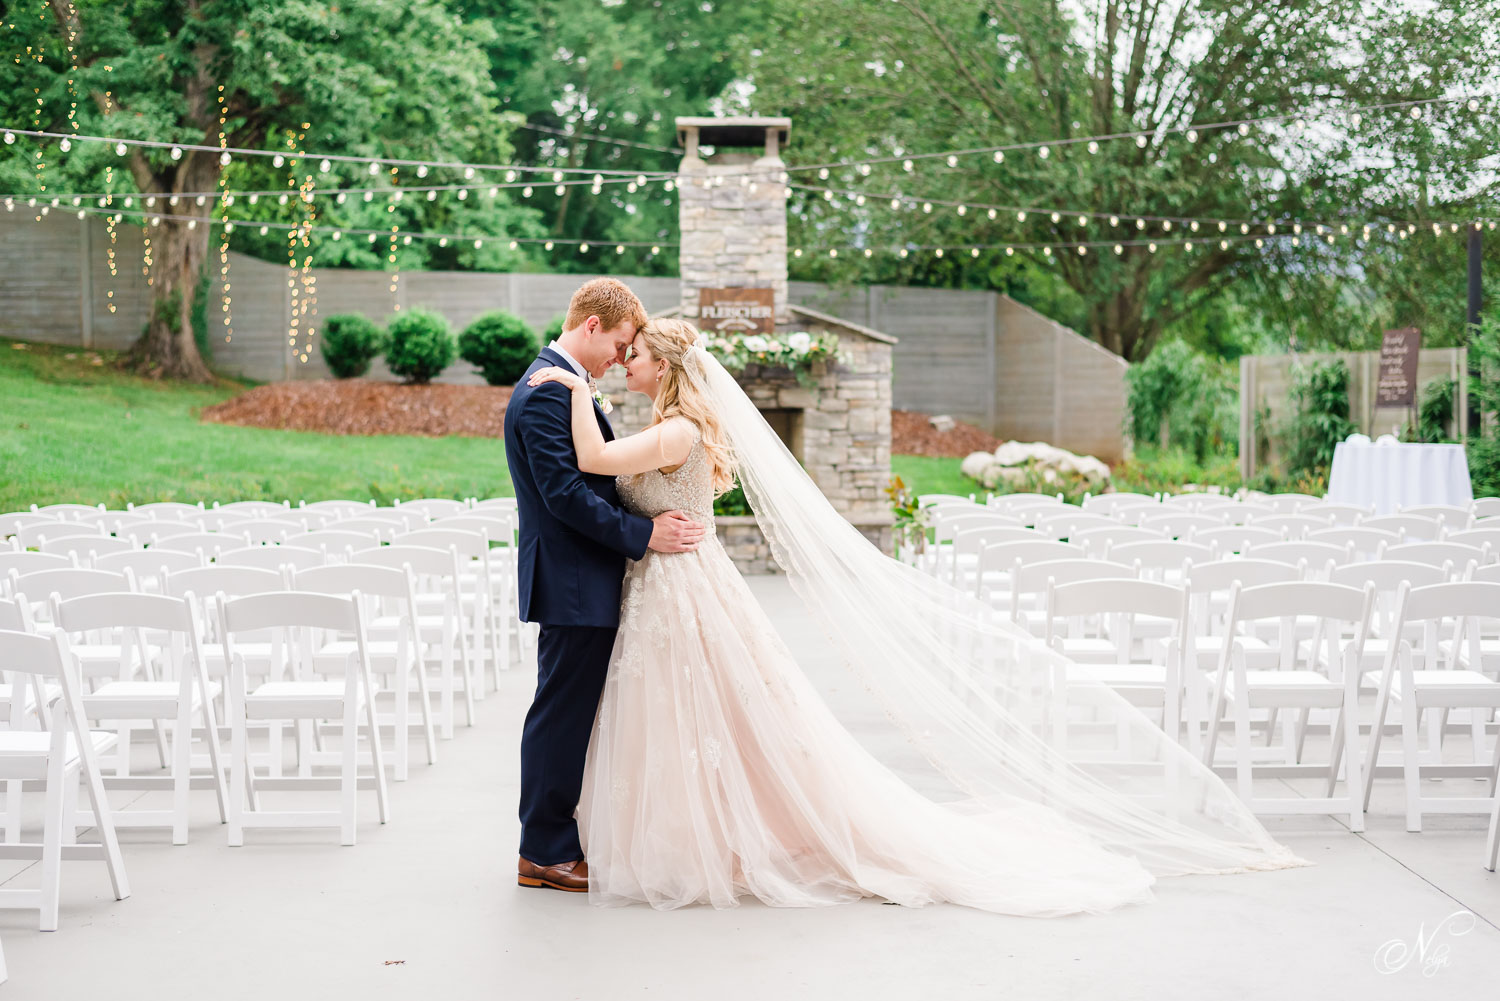 bride in stella York dress and cathedral length veil outside with groom in front of white chairs and an outdoor fireplace in Chattanooga TN